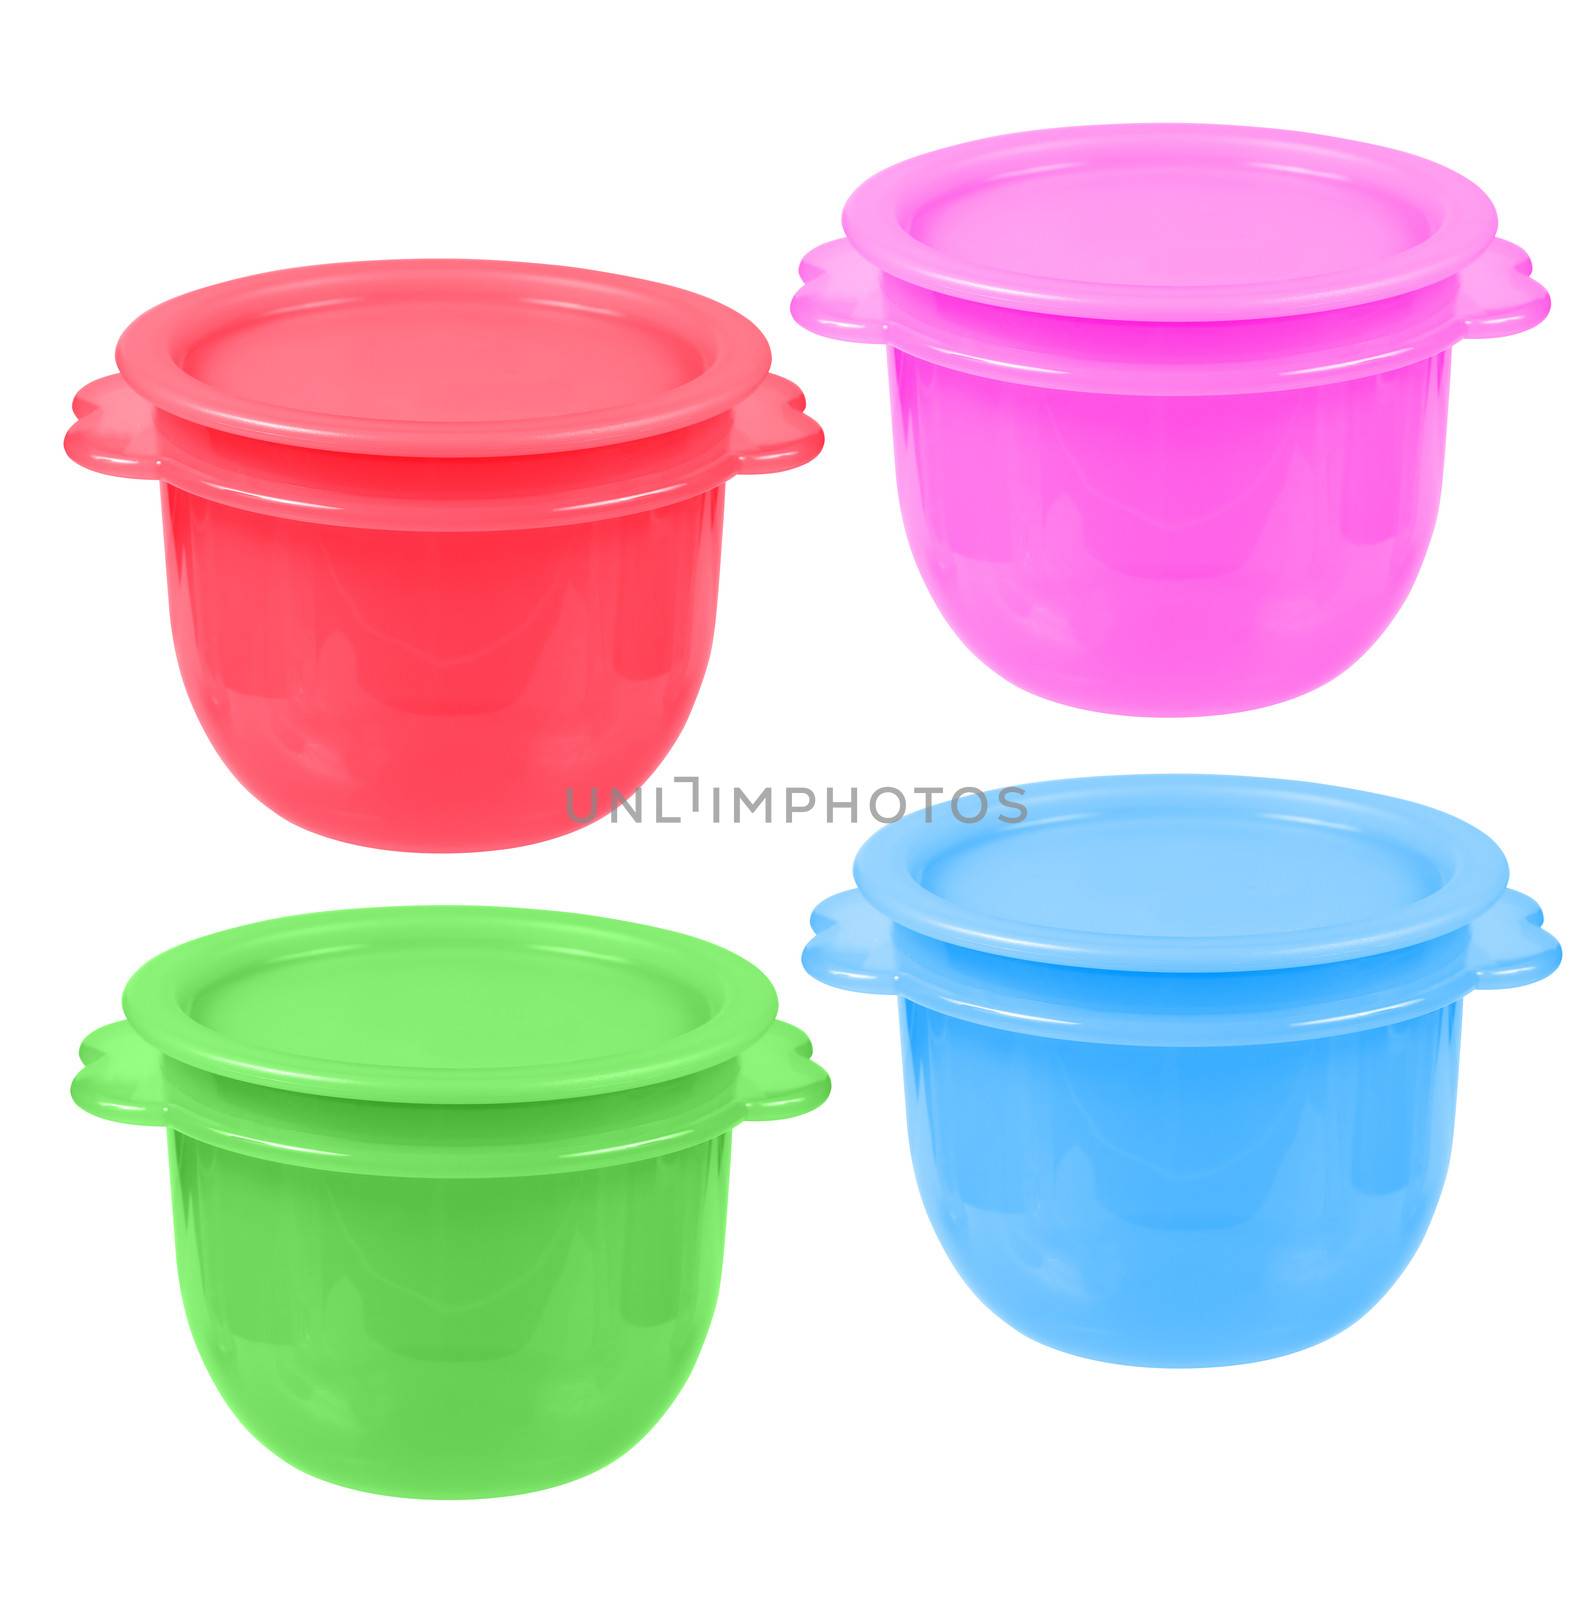 Plastic containers for food isolated on white. collage of four different colored objects